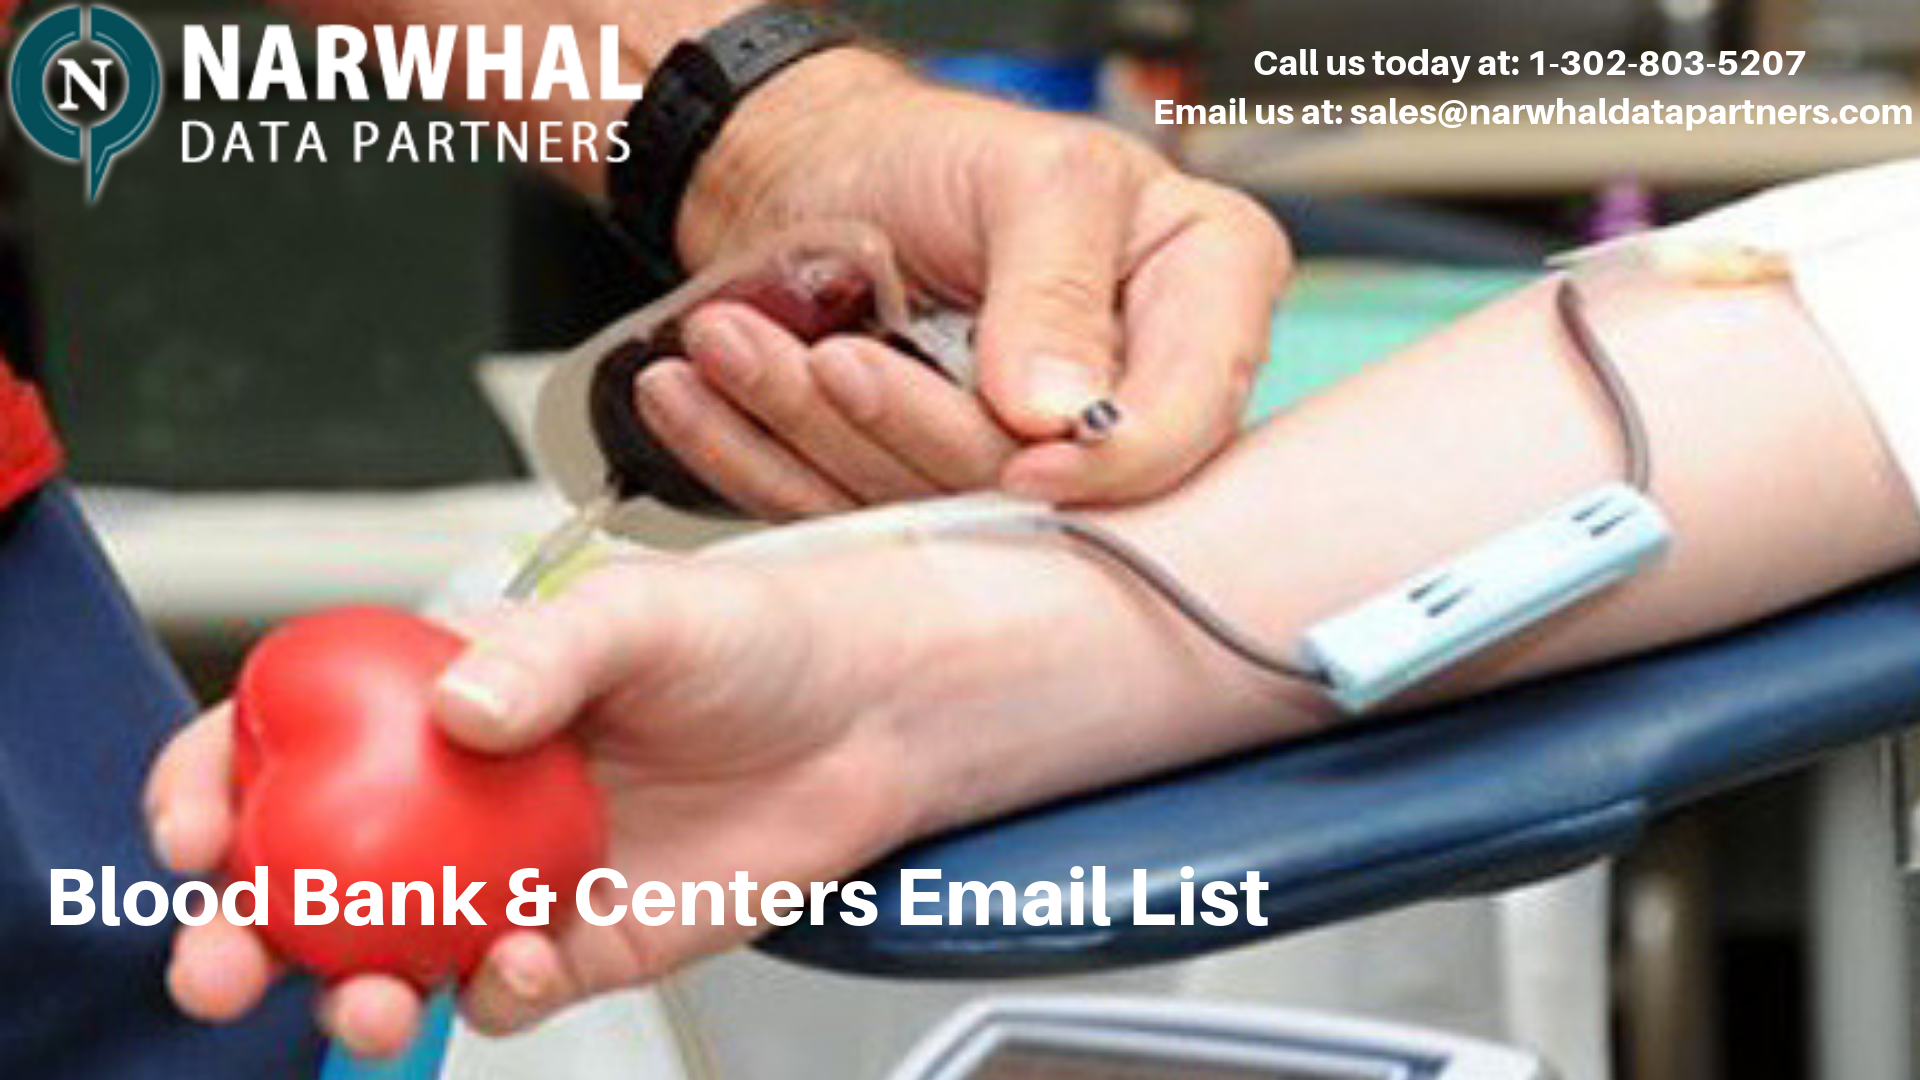 http://narwhaldatapartners.com/blood-bank-and-centers-email-list.html